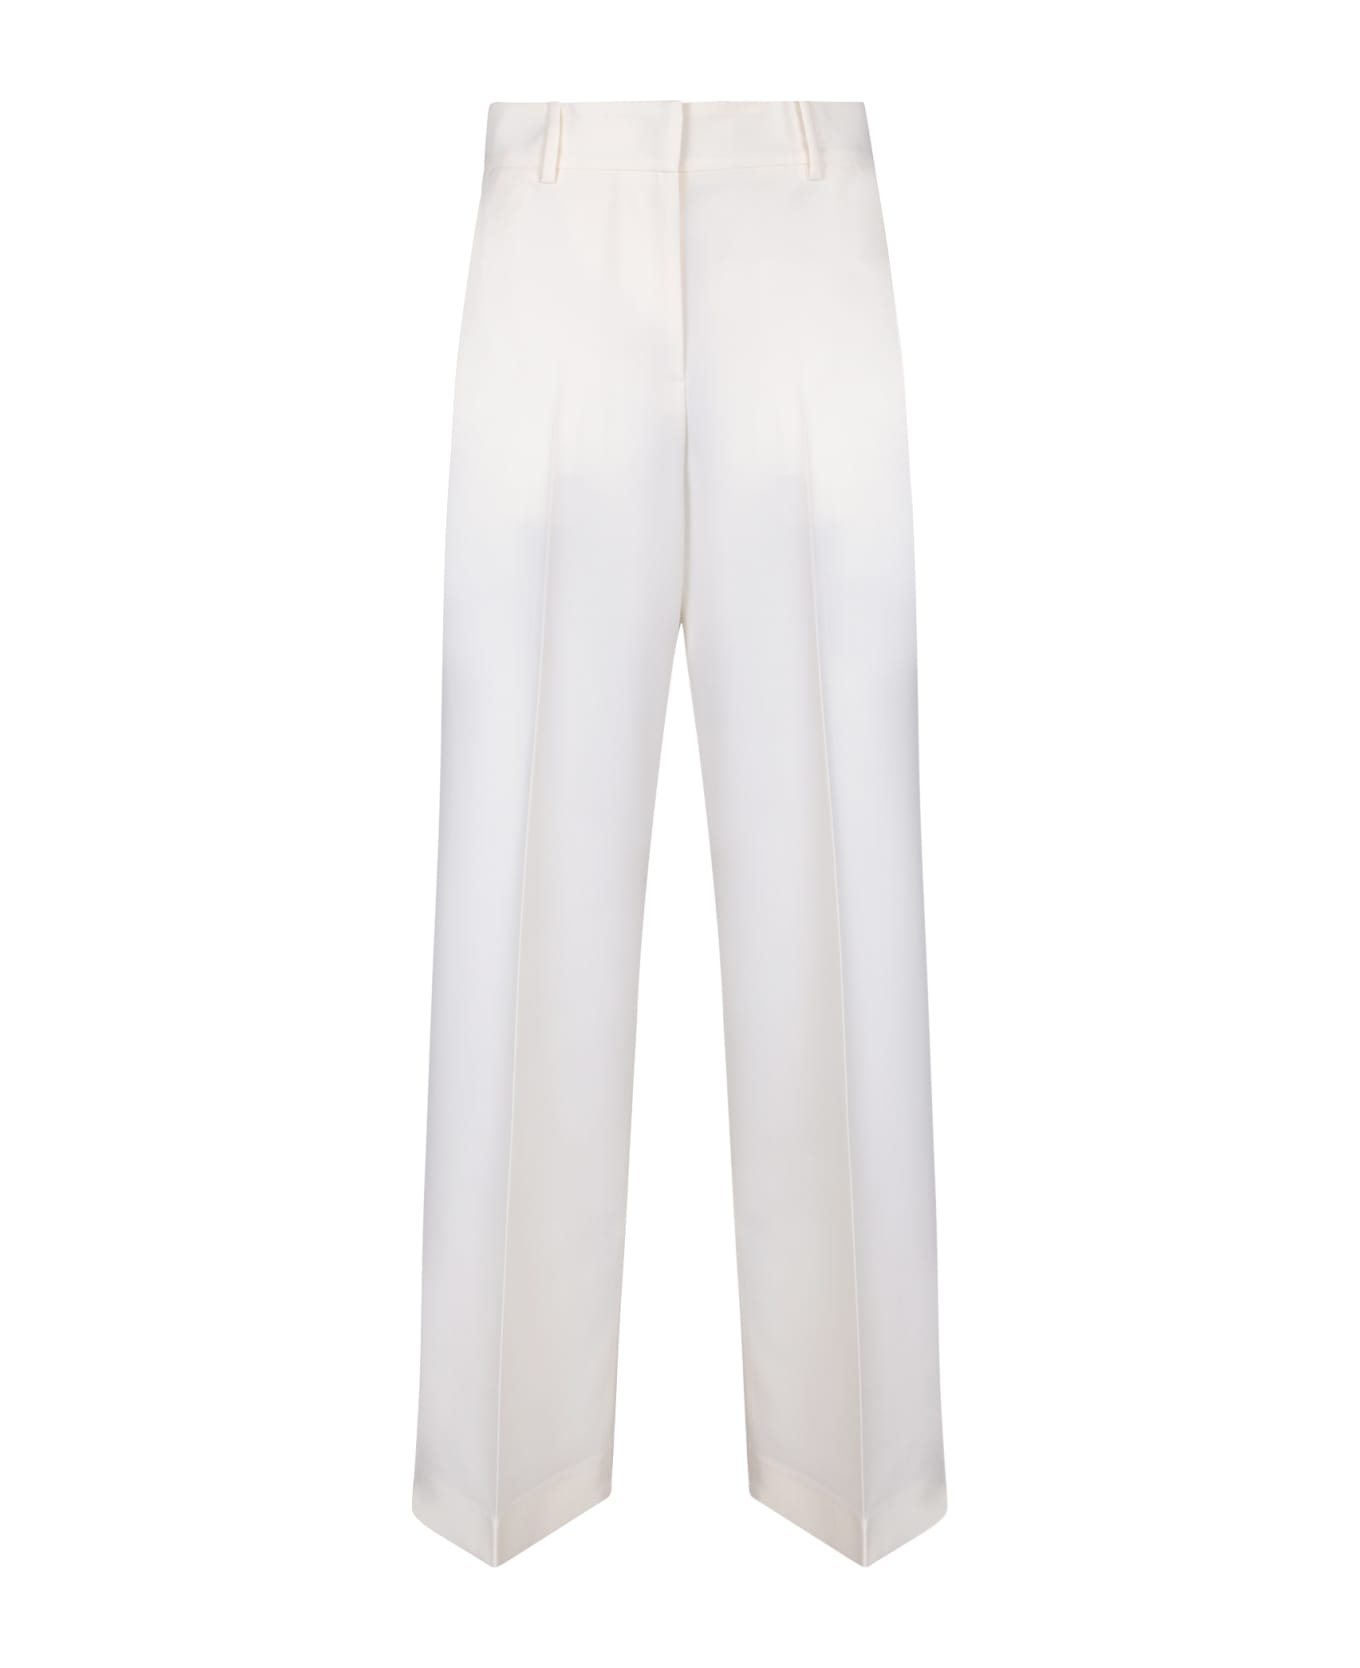 MSGM White Tailored Trousers - White